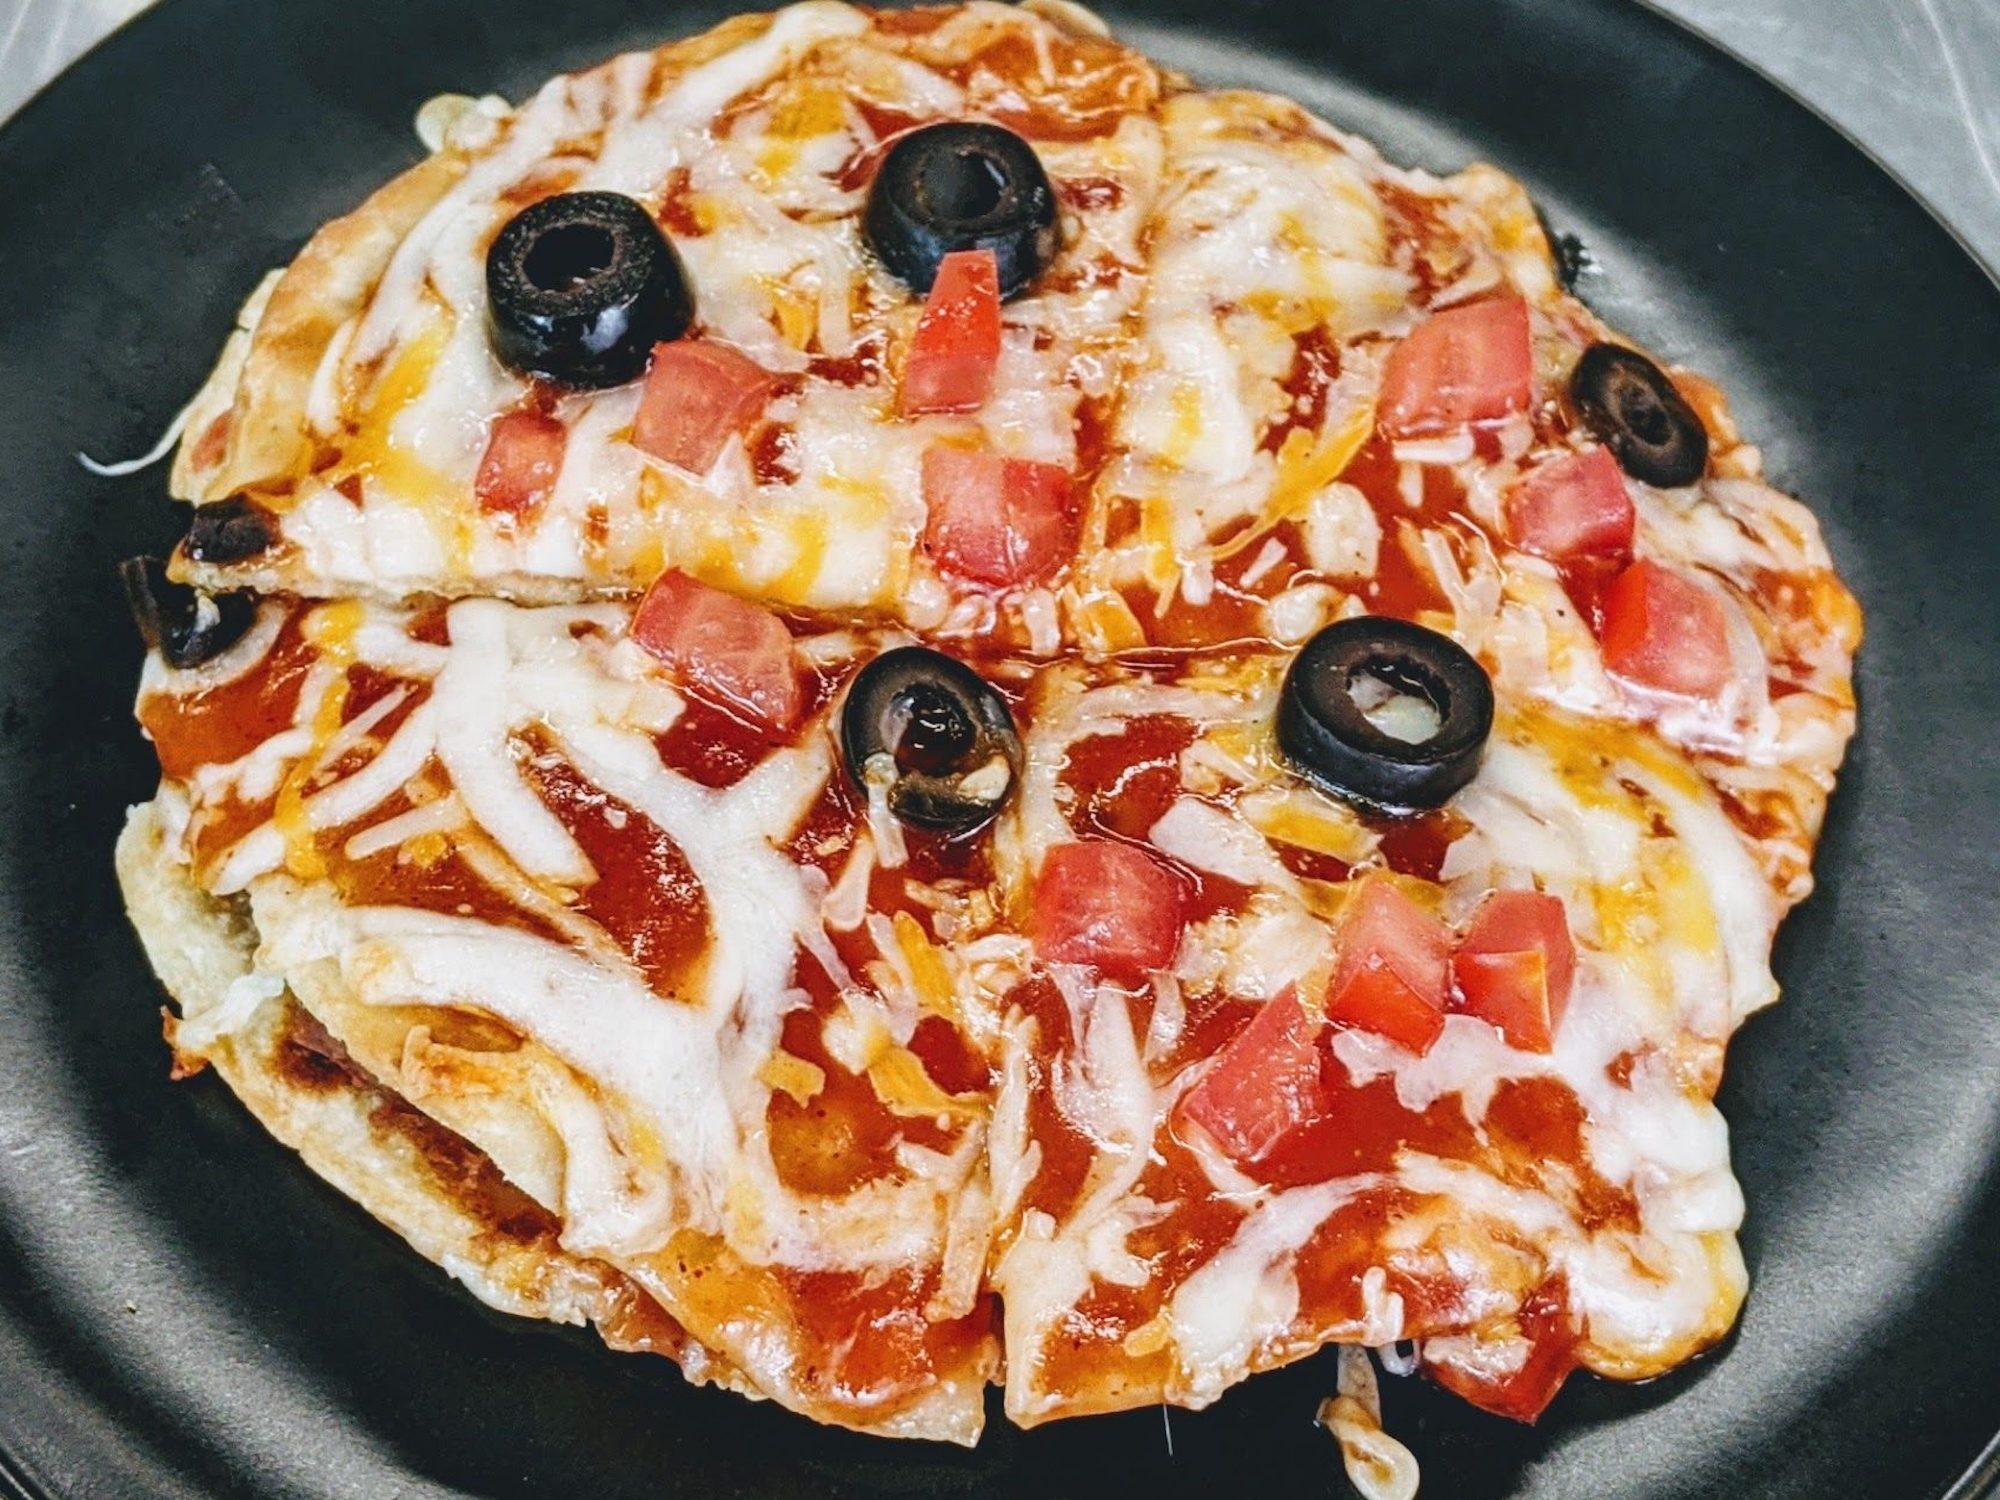 wd - Copycat Taco Bell Mexican Pizza Image